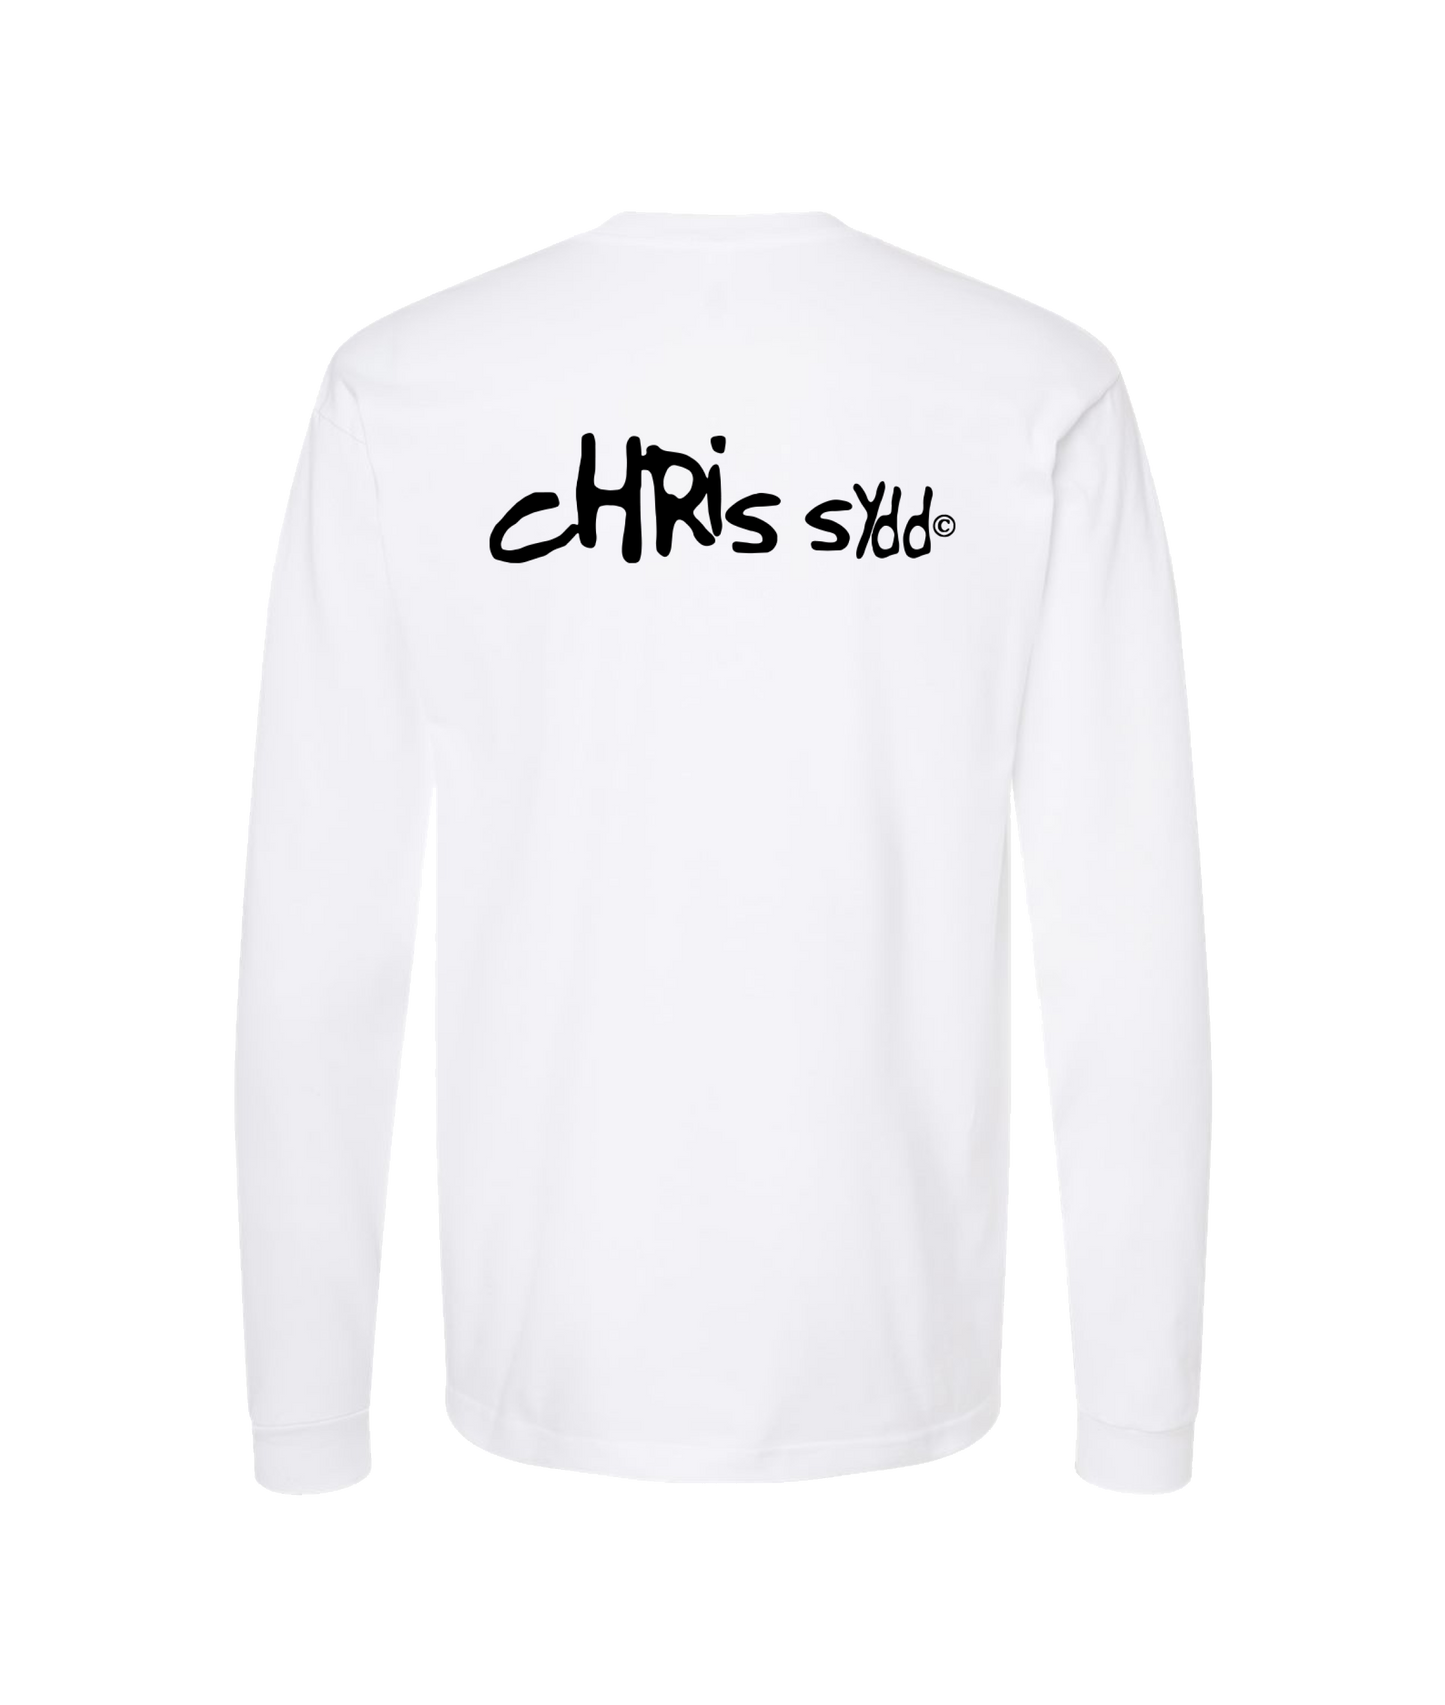 CHRIS SYDD - It Looks Just As Stupid When You Do It. - White Long Sleeve T